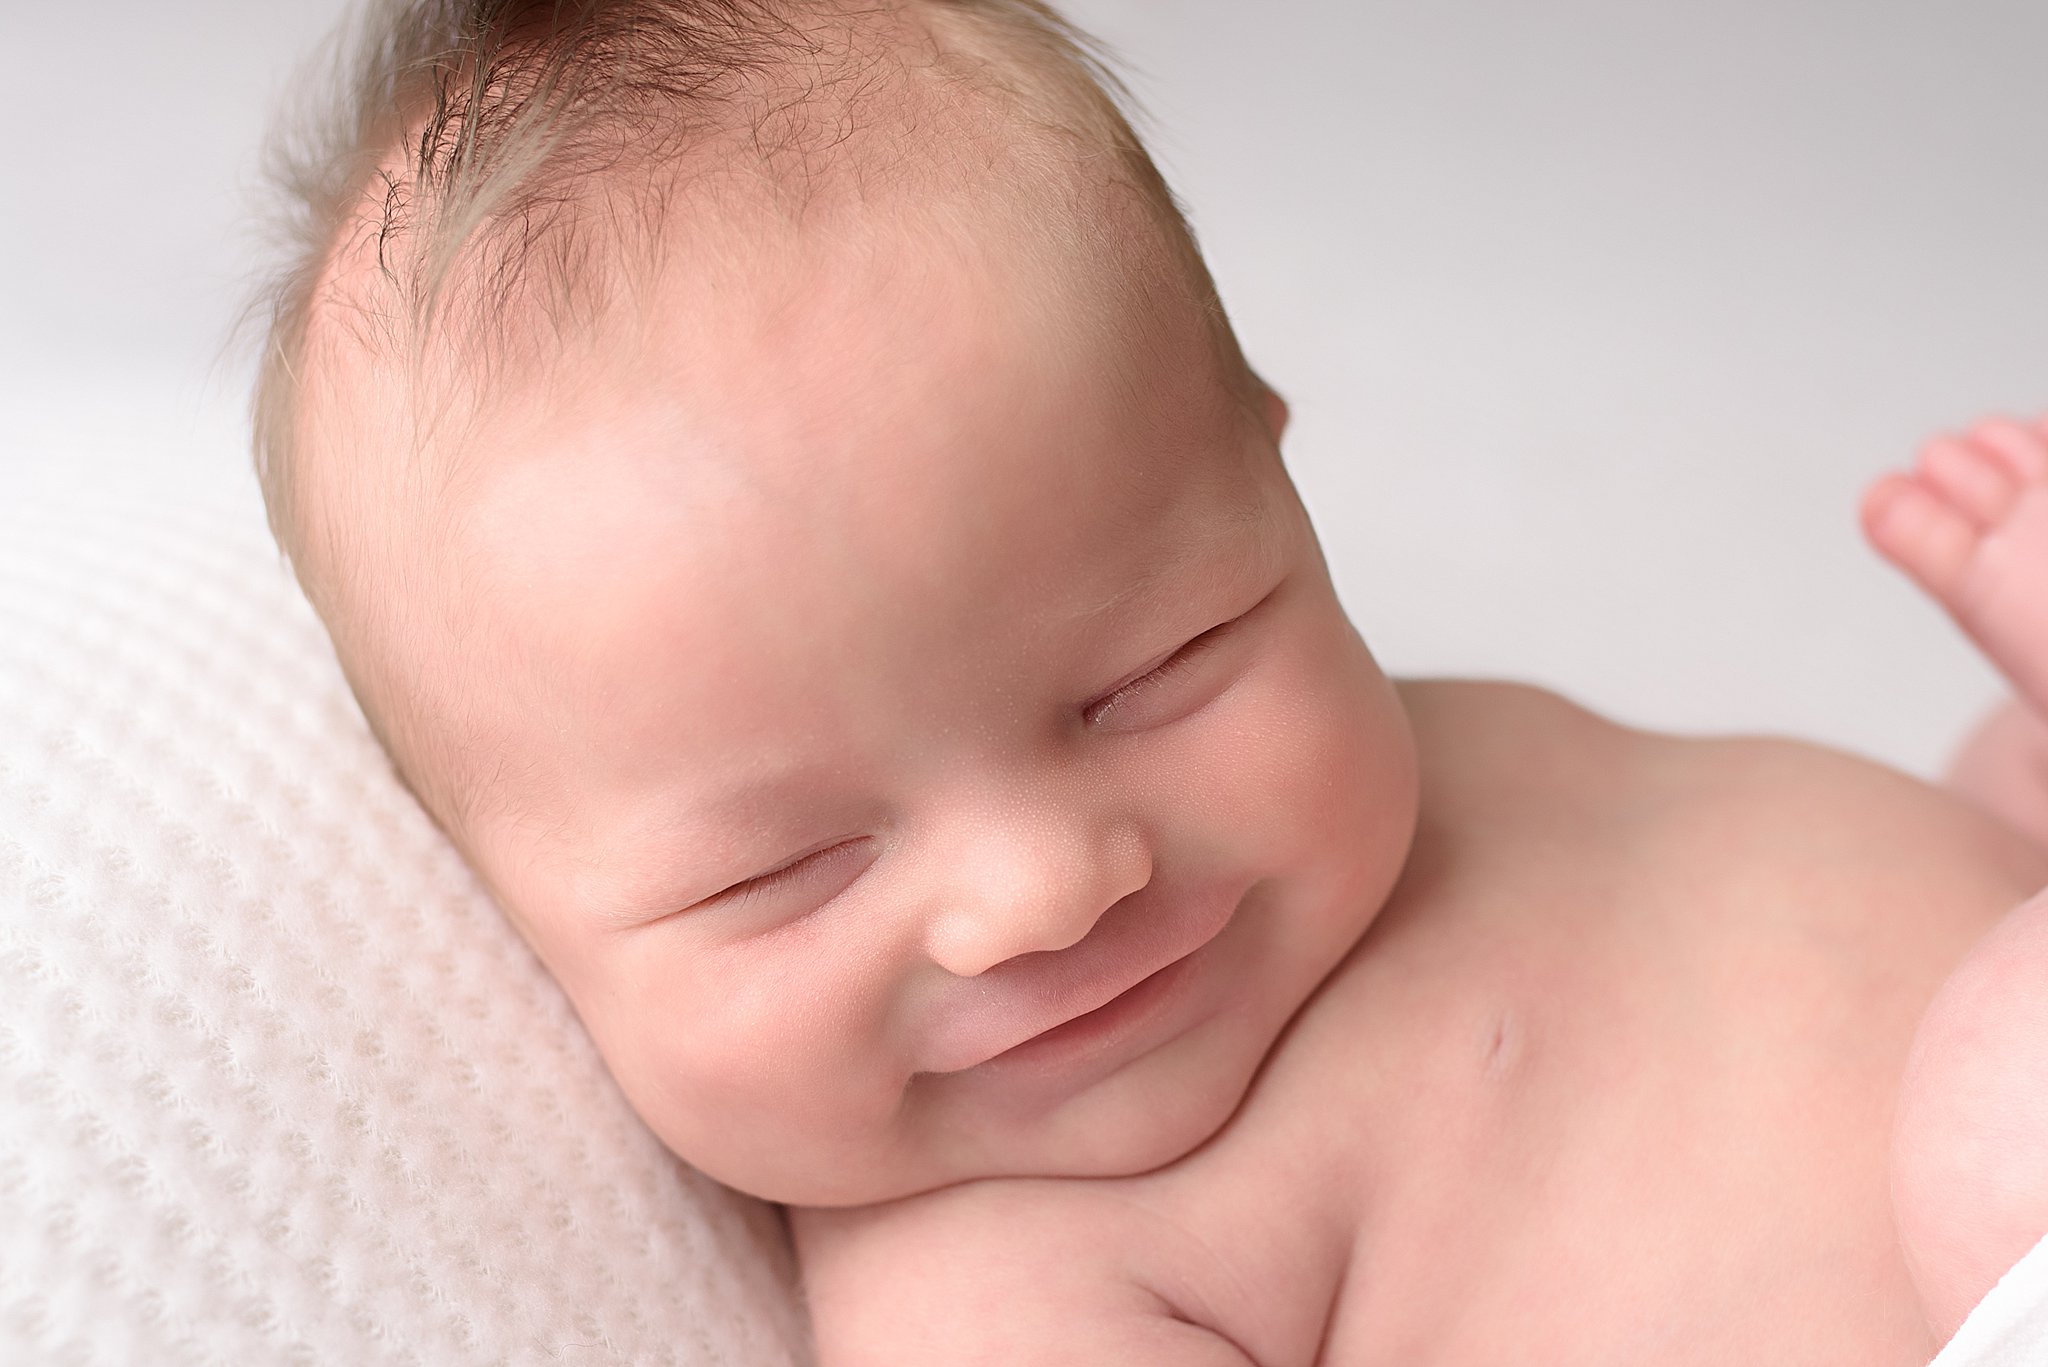 A newborn baby smiles in its sleep on a white pillow